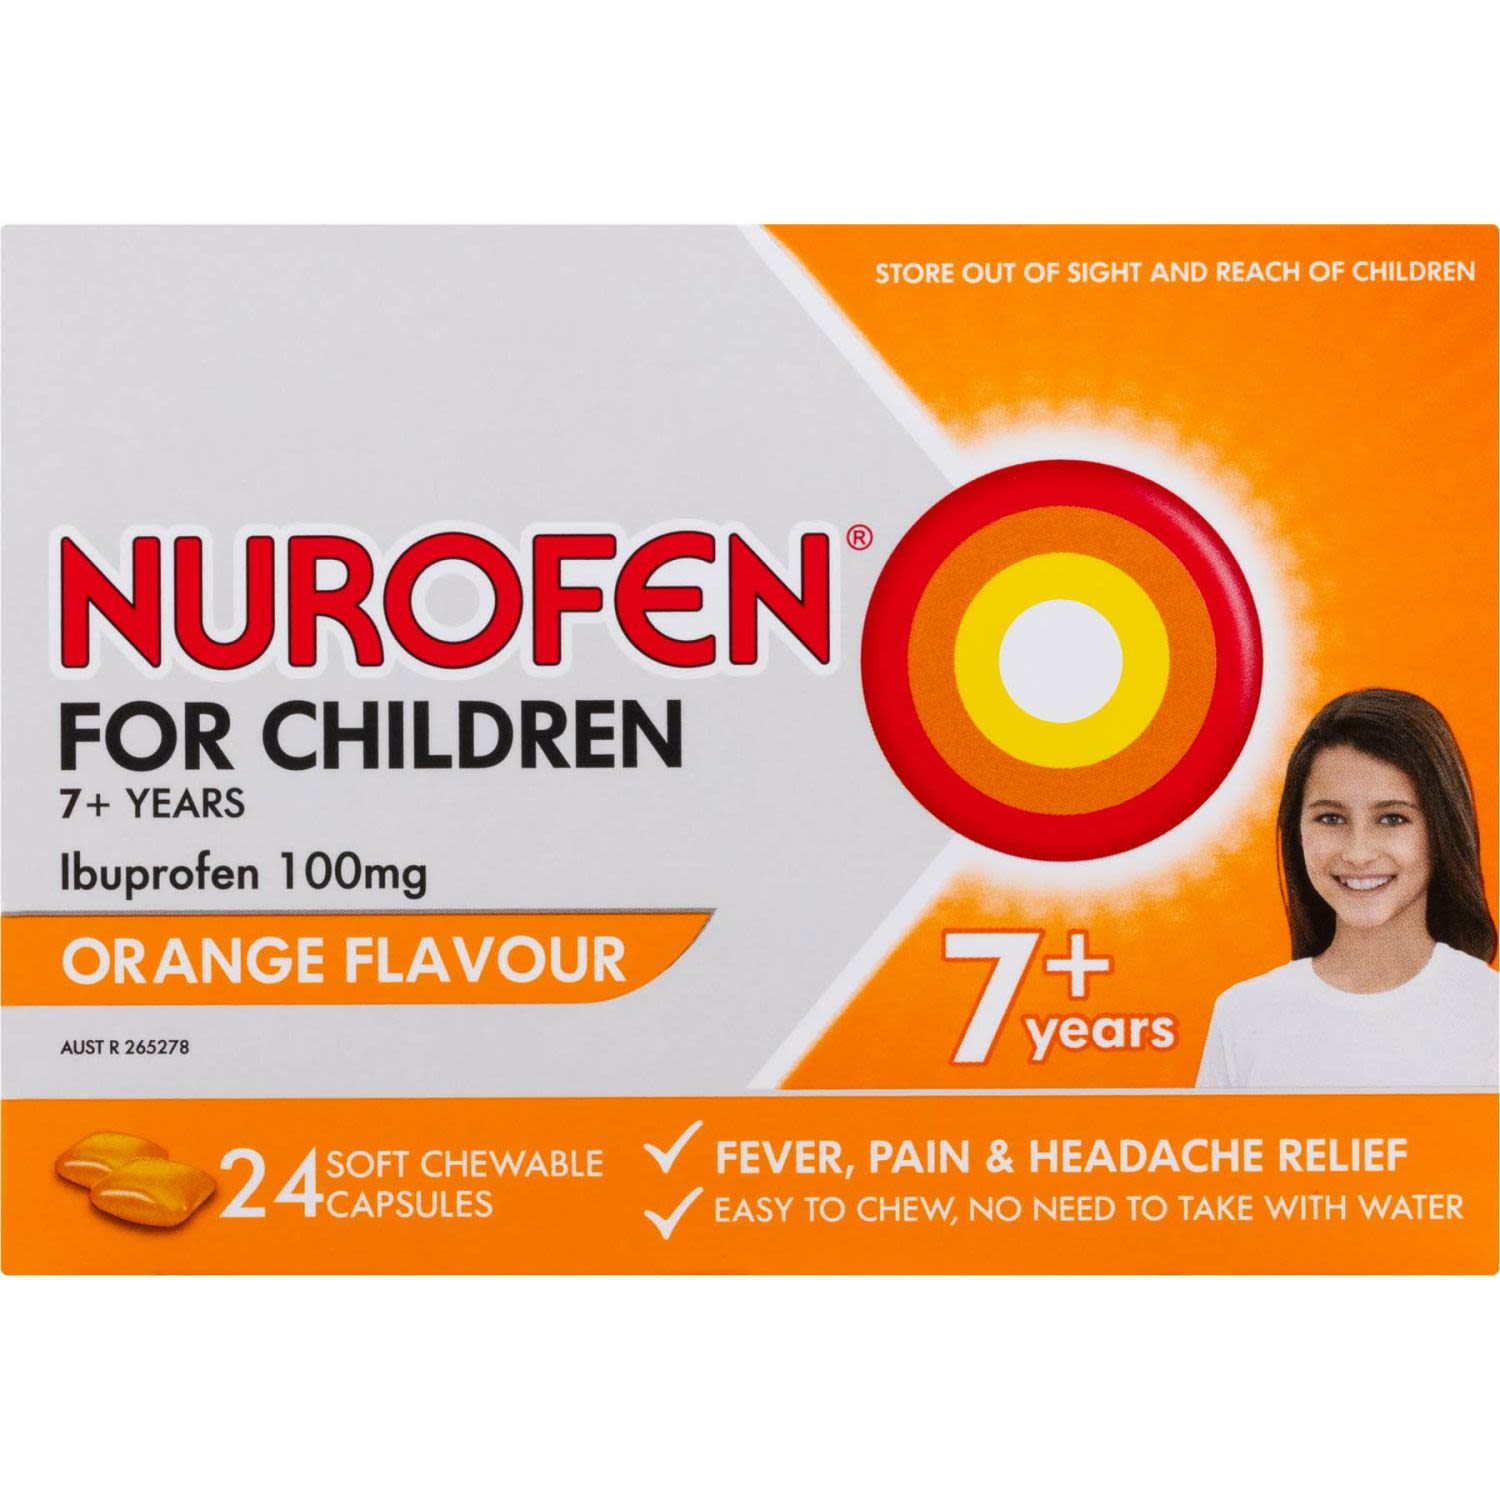 Nurofen For Children 7and Pain and Fever Relief Chewable Capsules 100mg Ibuprofen Orange, 24 Each